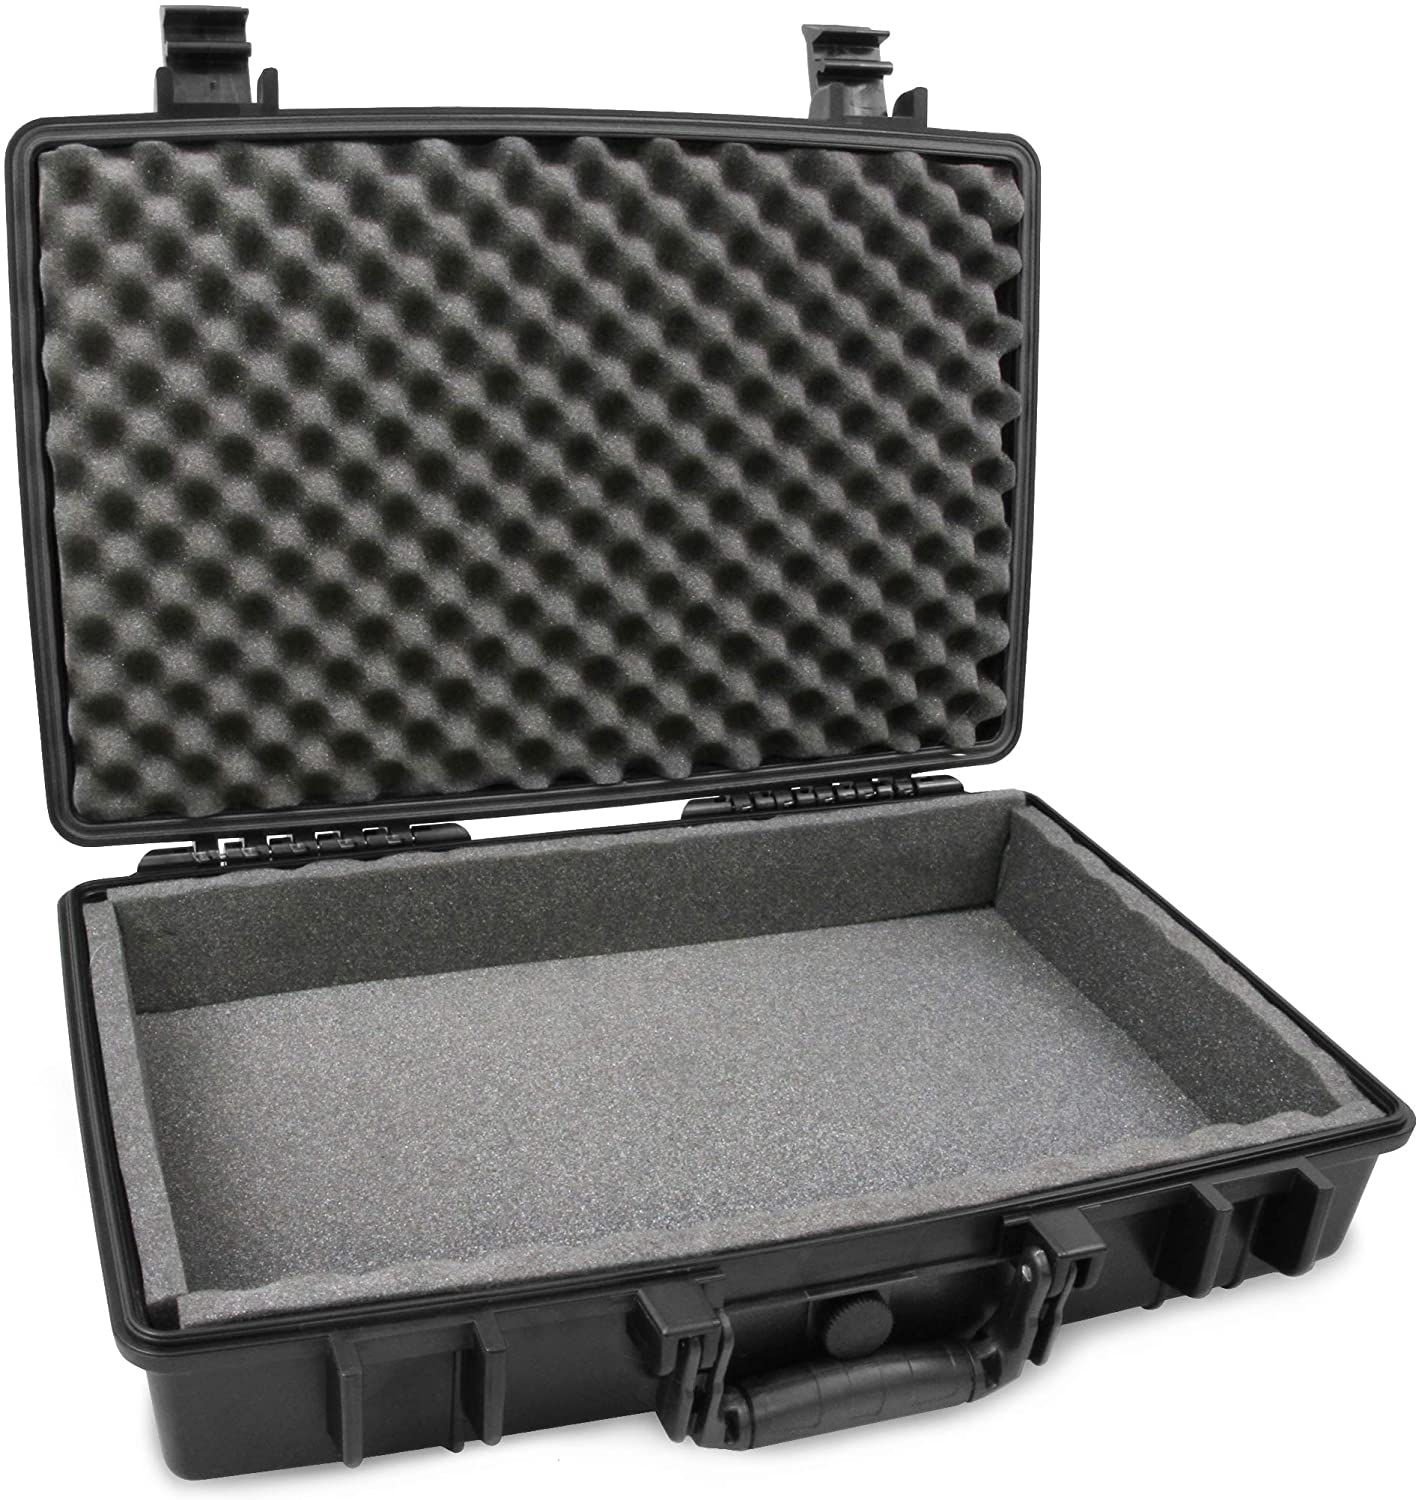 1495 Protector Laptop Case | Pelican Official Store